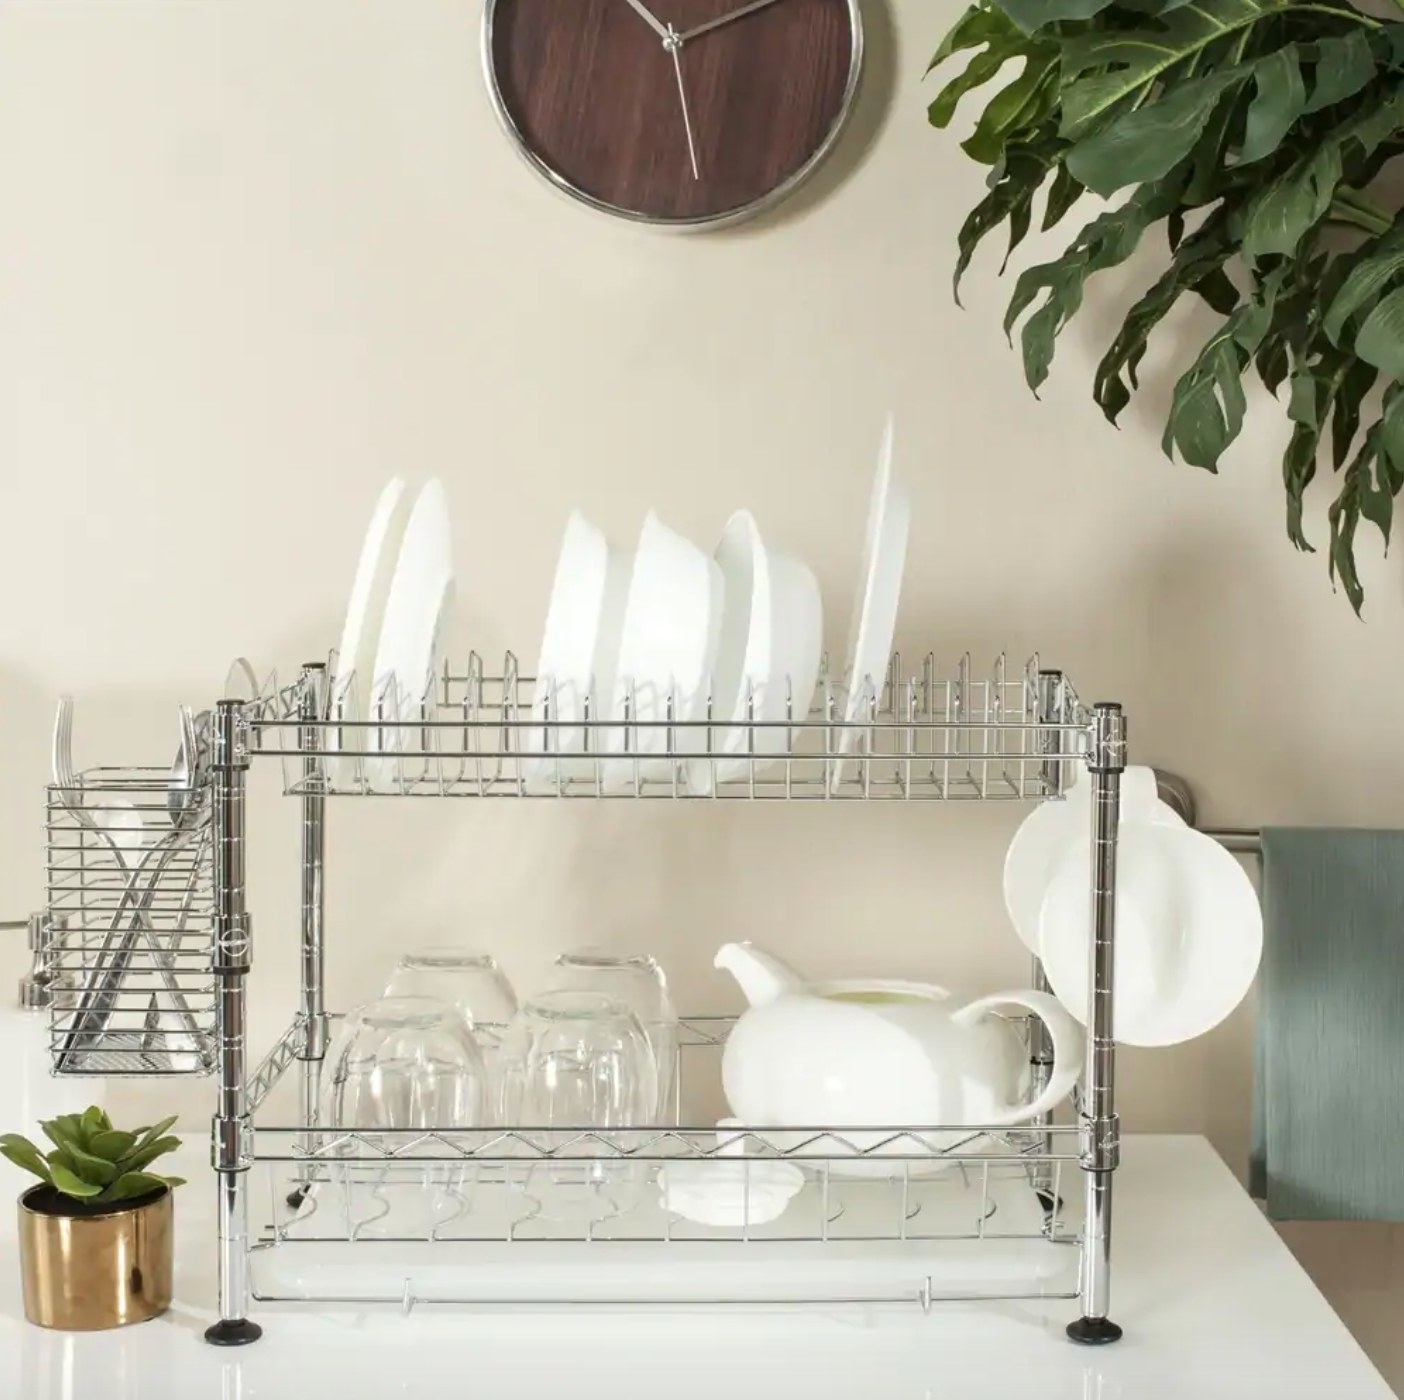 The two tiered wire dish rack